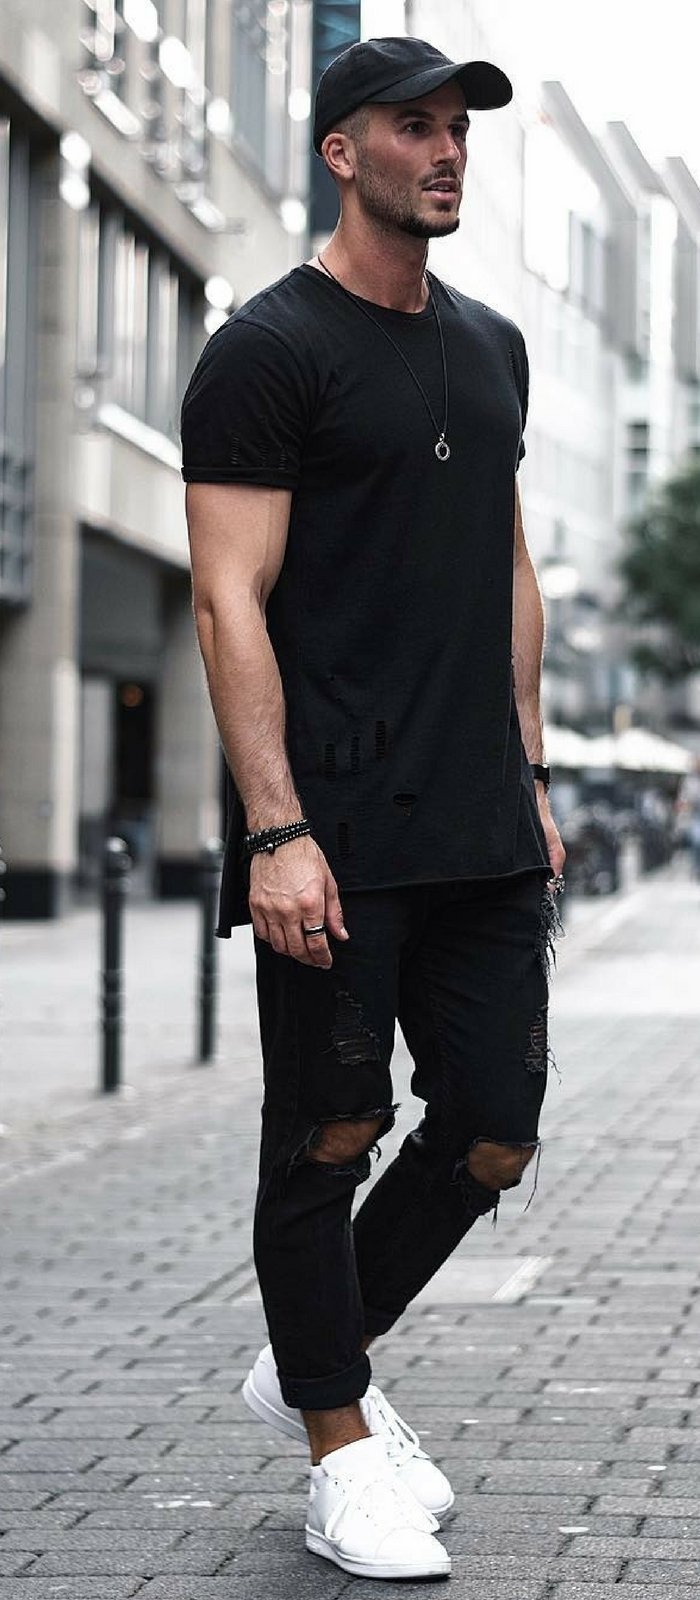 COOLEST CASUAL STREET STYLES FOR MEN